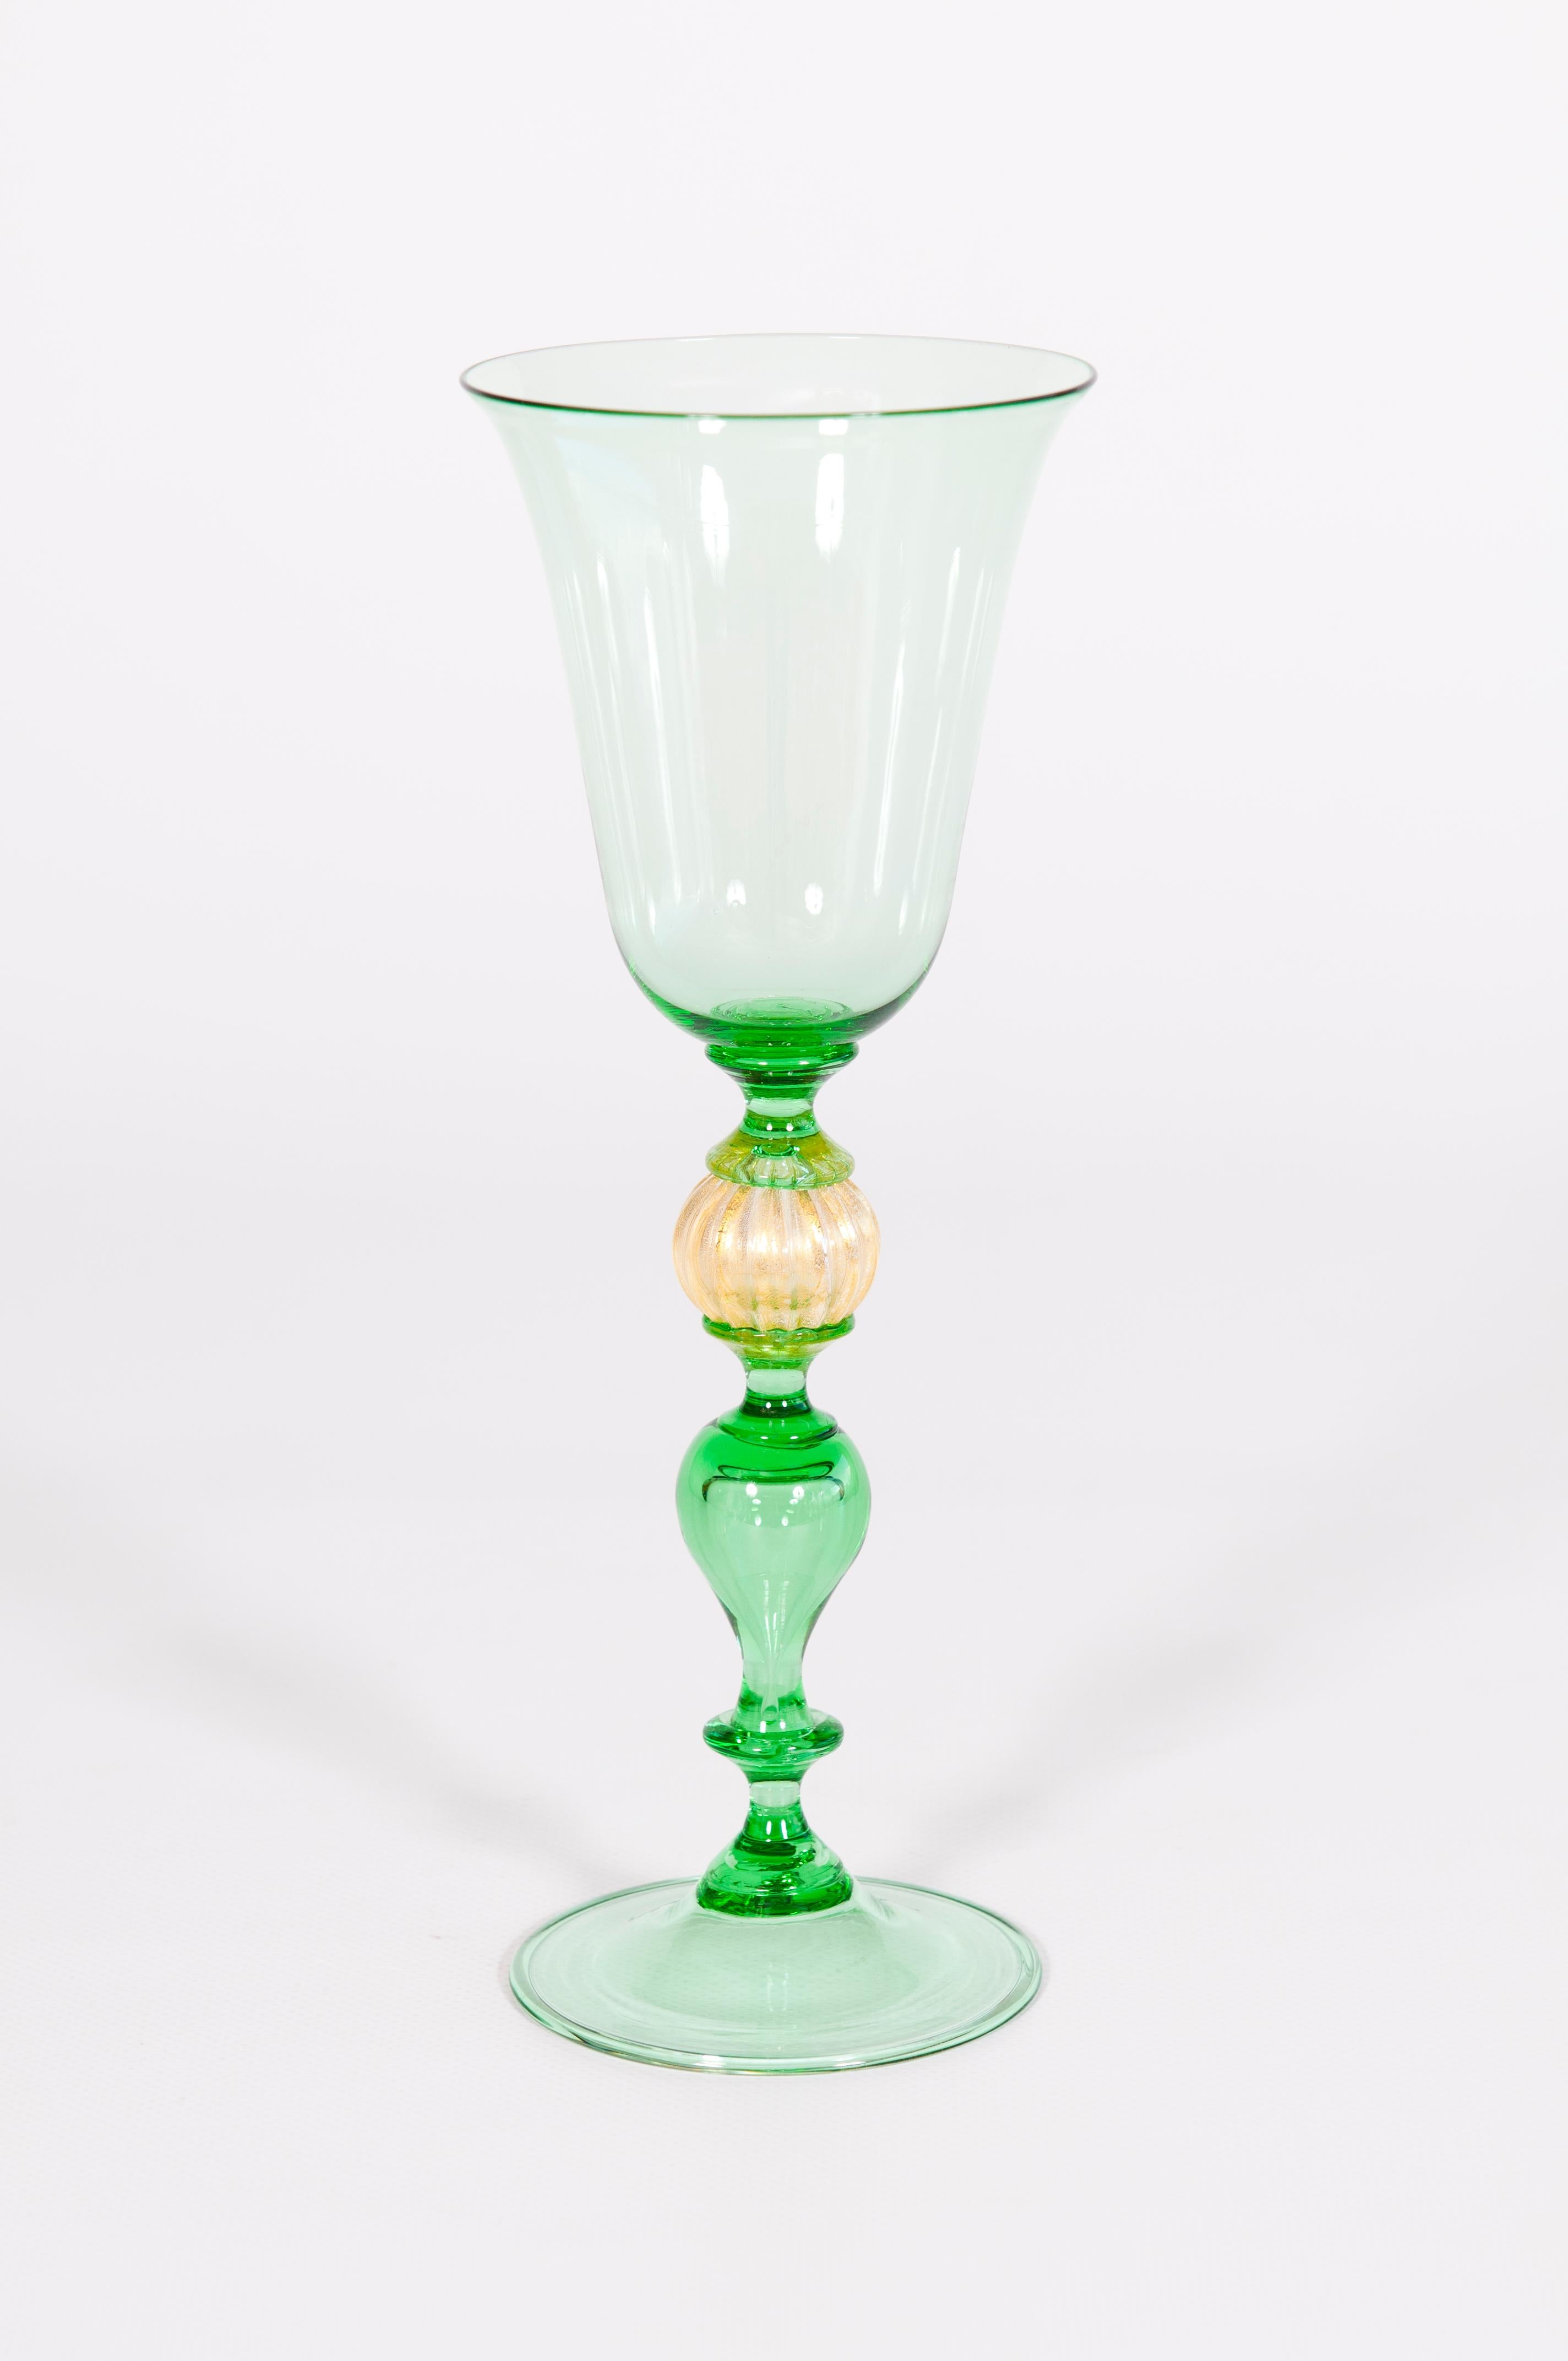 Elegant Glass in Green with Gold Leaf color  in blown Murano Glass 1990s Italy.
This is a fine piece of the Italian art of Murano blown glass. It was entirely handmade by local glass artists, as is clearly visible by the precision of all the